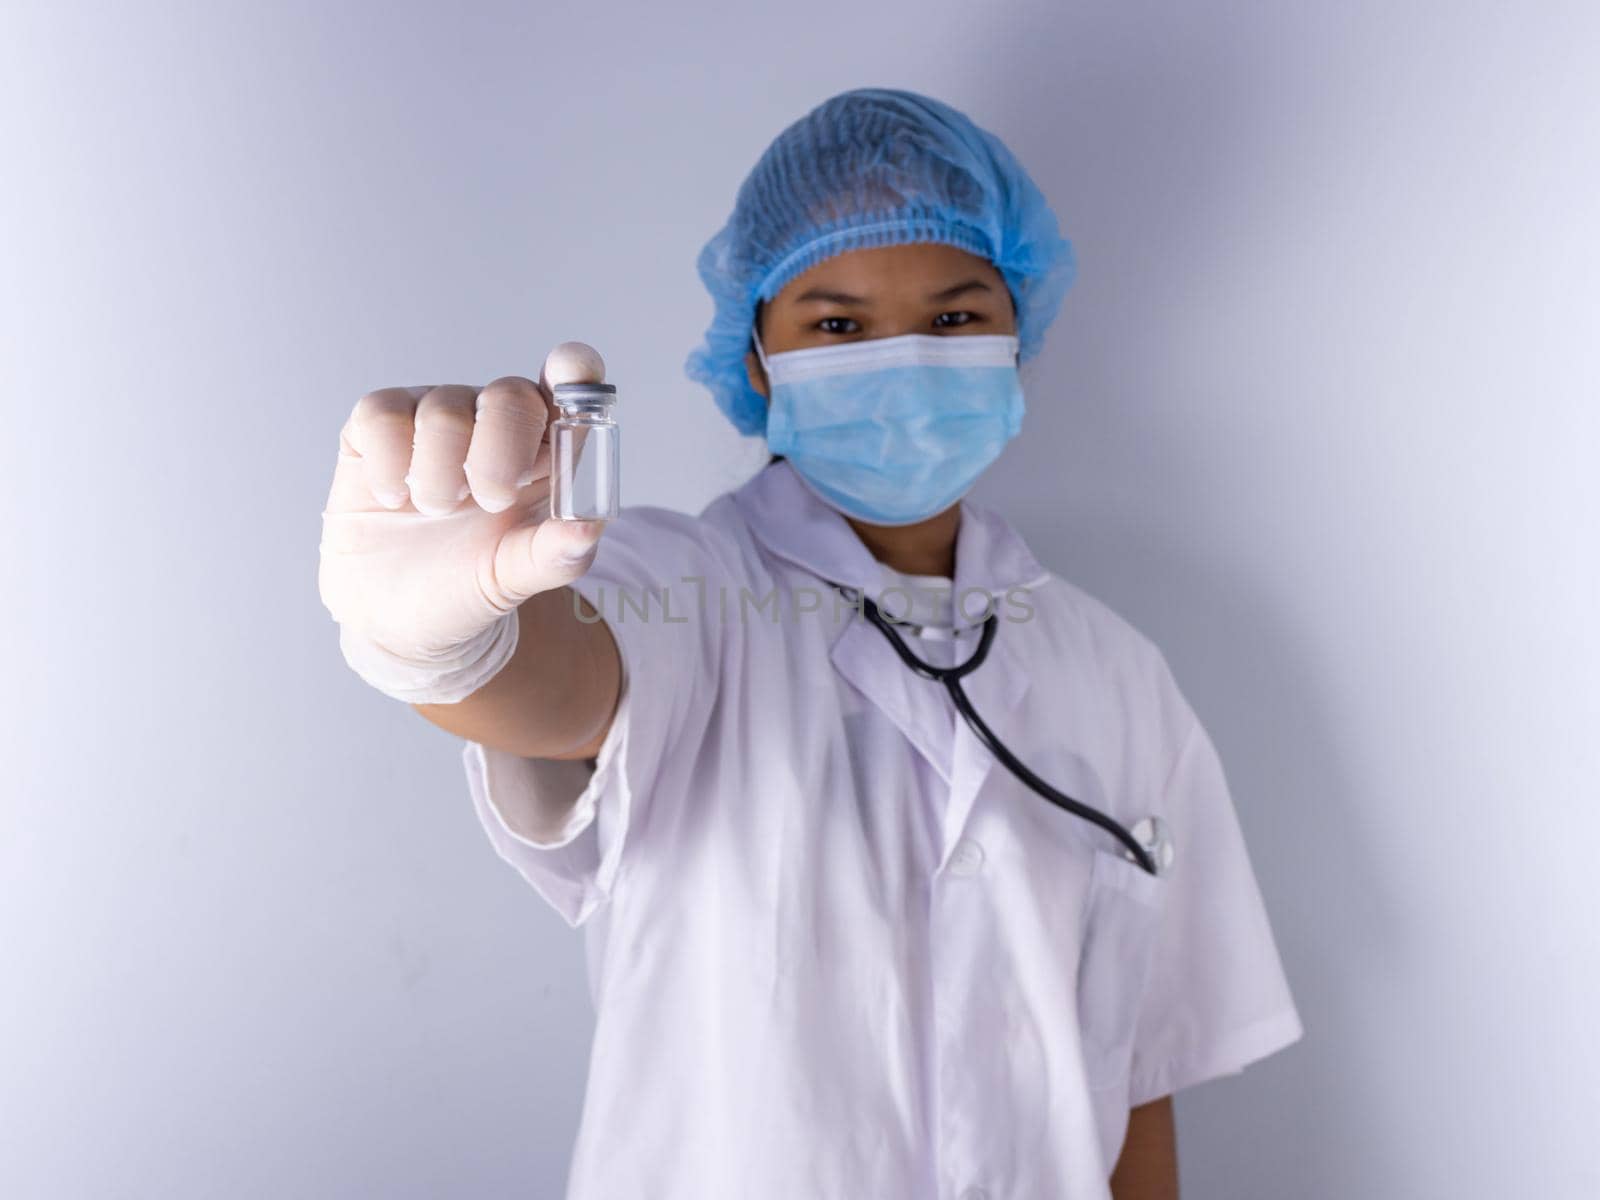 Studio portrait of a female doctor wearing a mask and wearing a hat. in the hand of the vaccine bottle and stretched out his arms in front standing on a white background. studio shot background, COVID-19 concept by Unimages2527